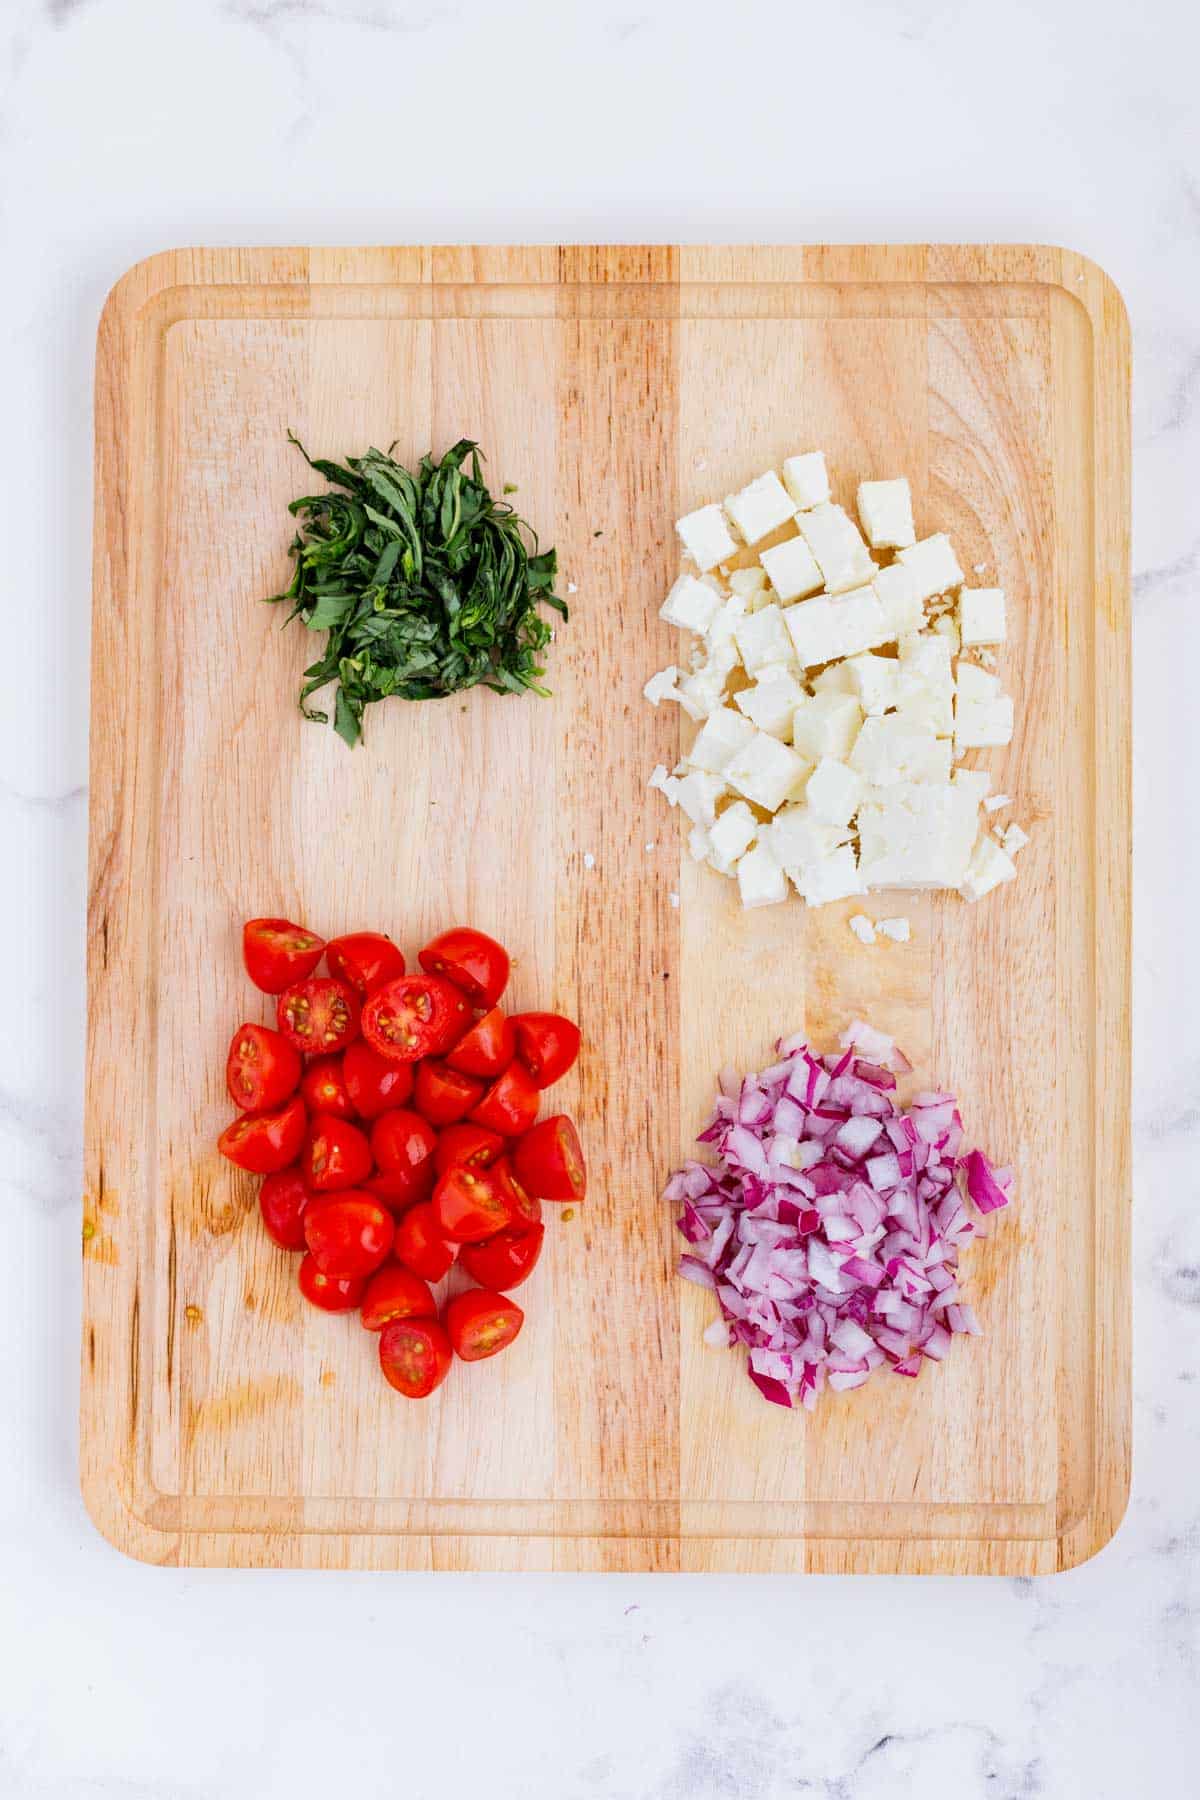 Basil, onion, tomatoes, and feta cheese are cut up.